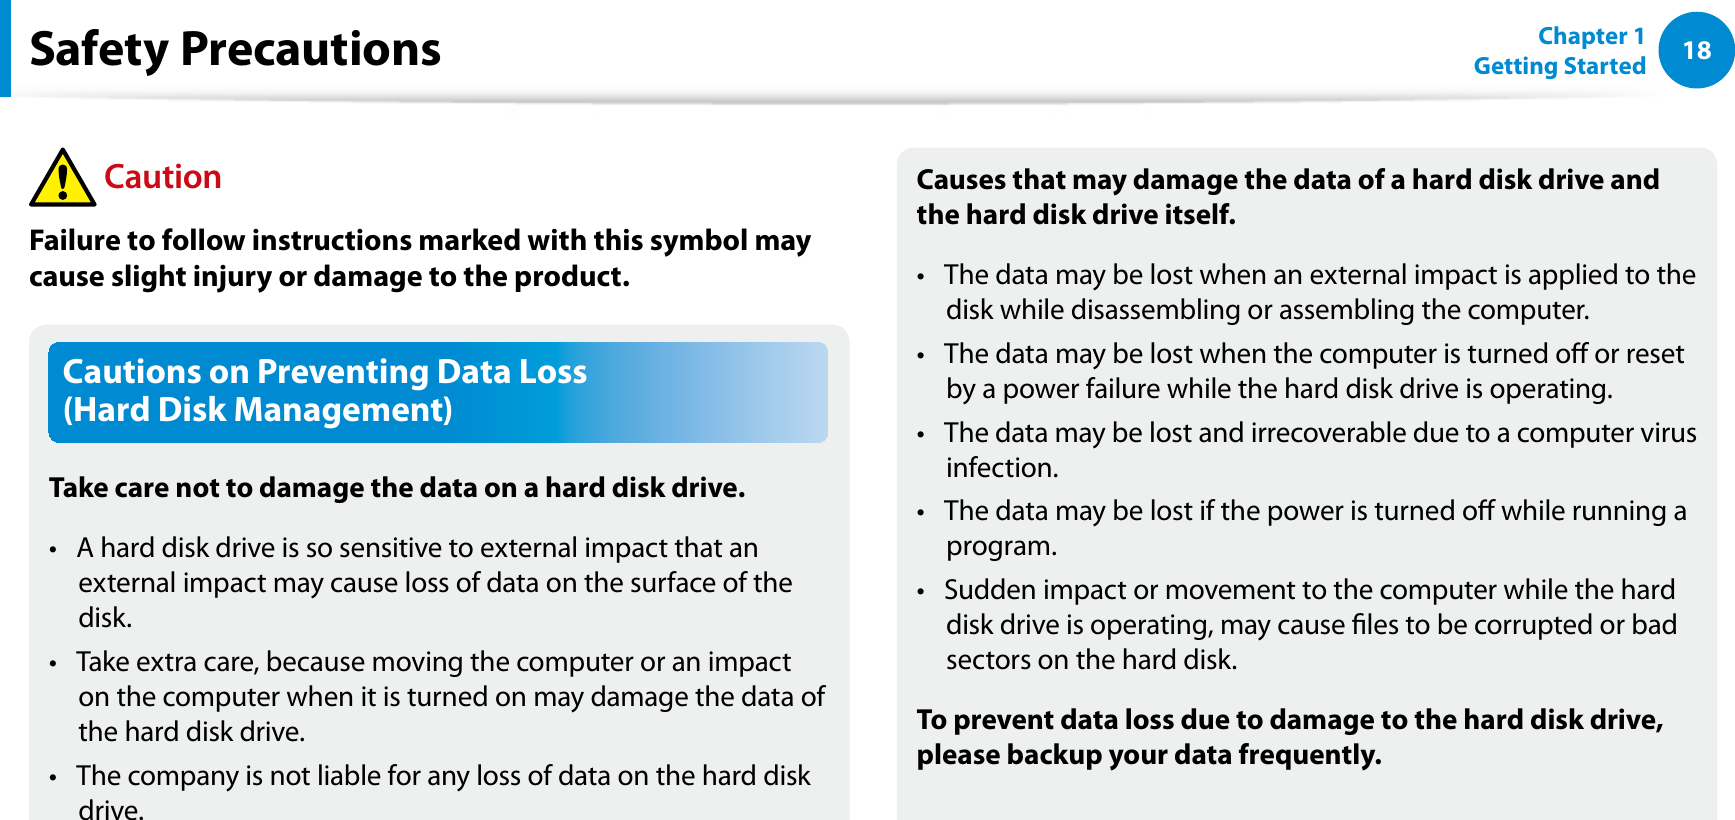 18Chapter 1 Getting StartedCautions on Preventing Data Loss  (Hard Disk Management)Take care not to damage the data on a hard disk drive.A hard disk drive is so sensitive to external impact that an t external impact may cause loss of data on the surface of the disk.Take extra care, because moving the computer or an impact t on the computer when it is turned on may damage the data of the hard disk drive.The company is not liable for any loss of data on the hard disk t drive.Causes that may damage the data of a hard disk drive and the hard disk drive itself.The data may be lost when an external impact is applied to the t disk while disassembling or assembling the computer.The data may be lost when the computer is turned o or reset t by a power failure while the hard disk drive is operating.The data may be lost and irrecoverable due to a computer virus t infection.The data may be lost if the power is turned o while running a t program.Sudden impact or movement to the computer while the hard t disk drive is operating, may cause les to be corrupted or bad sectors on the hard disk.To prevent data loss due to damage to the hard disk drive, please backup your data frequently.Safety Precautions CautionFailure to follow instructions marked with this symbol may cause slight injury or damage to the product.